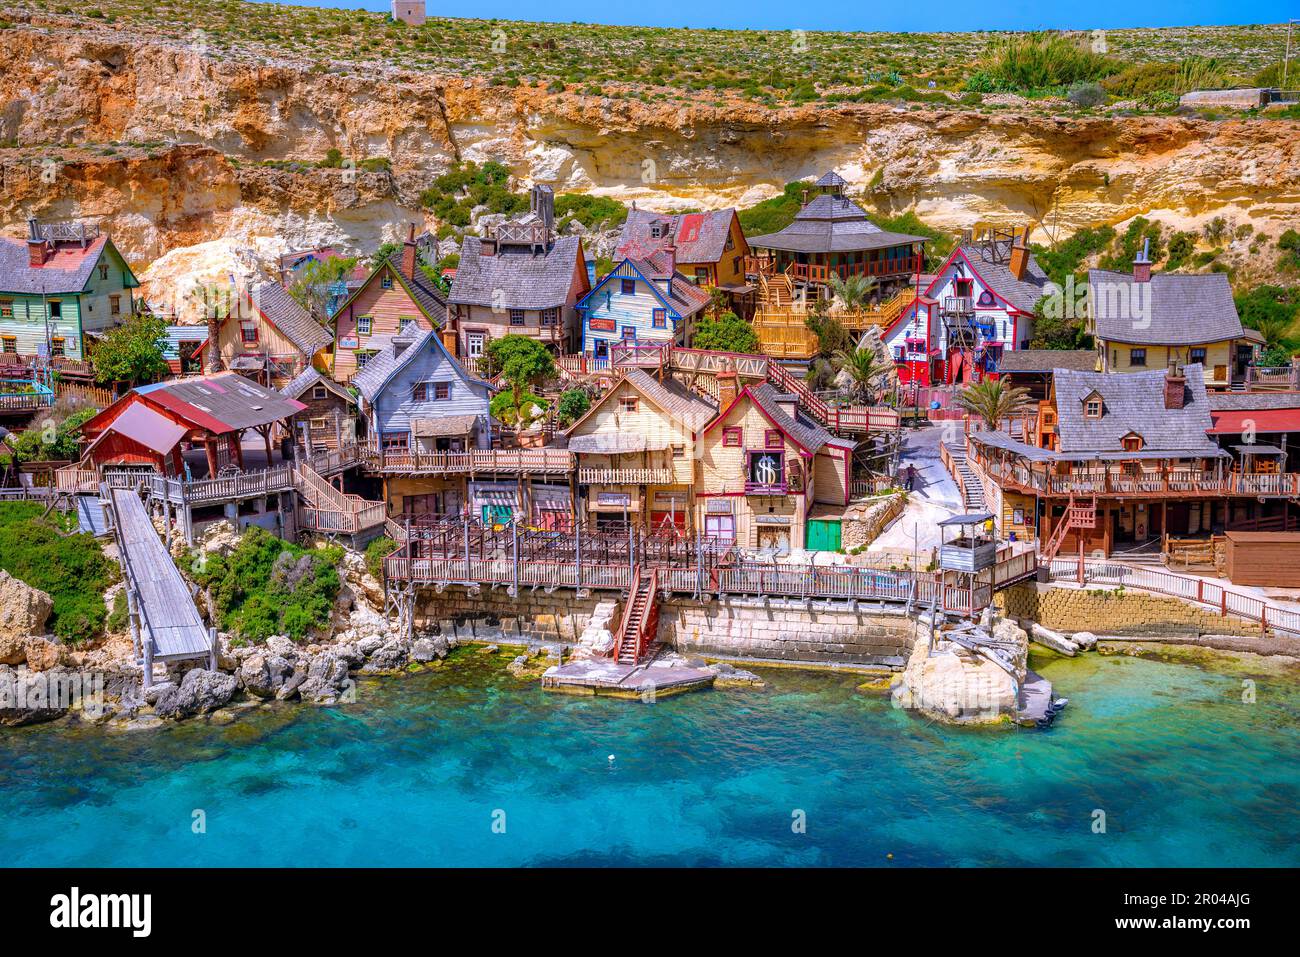 Malta, Il-Mellieha. View of the famous Popeye  village Mellieha and bay on a sunny day Stock Photo